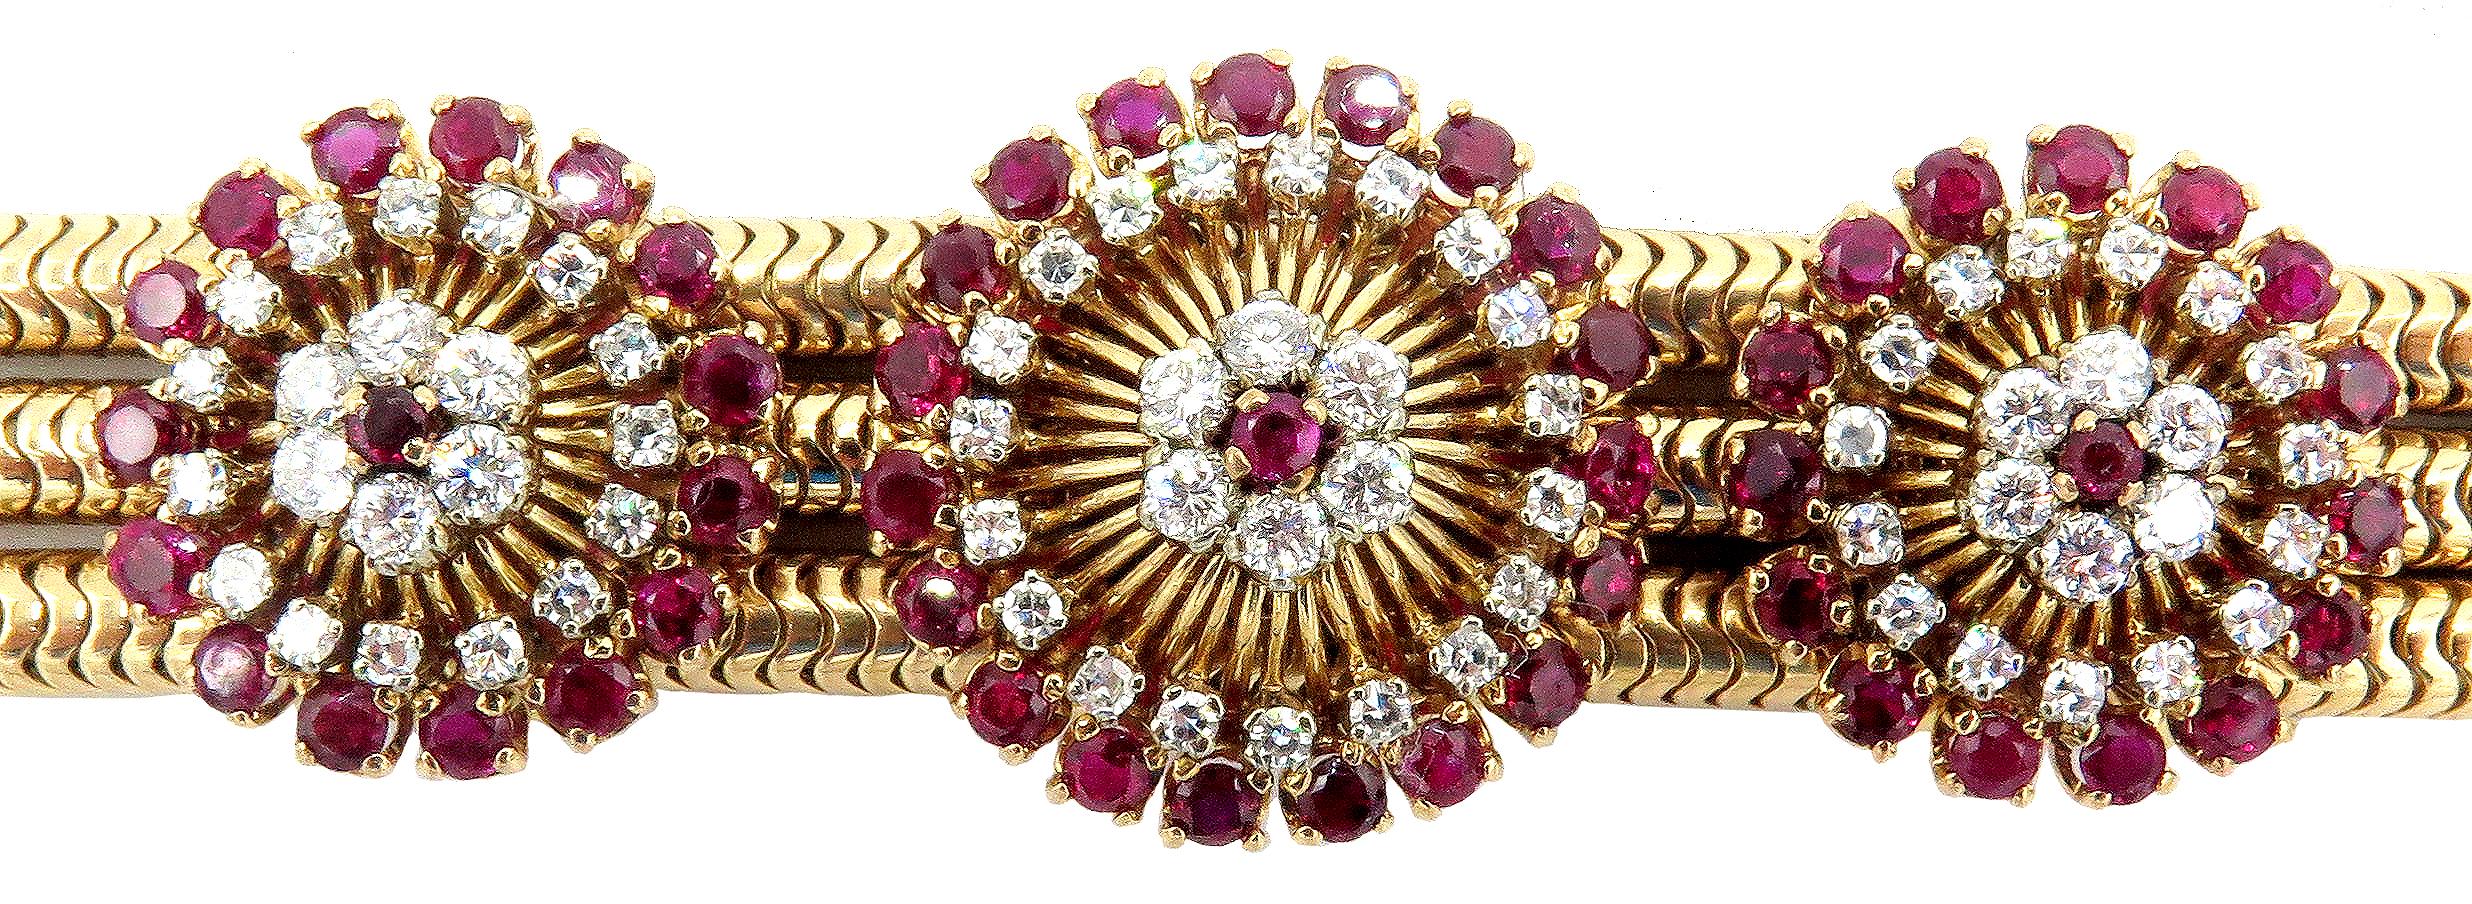 18 Karat Yellow Gold Fancy Ruby and Diamond Multi-Strand Bracelet In Excellent Condition For Sale In West Palm Beach, FL